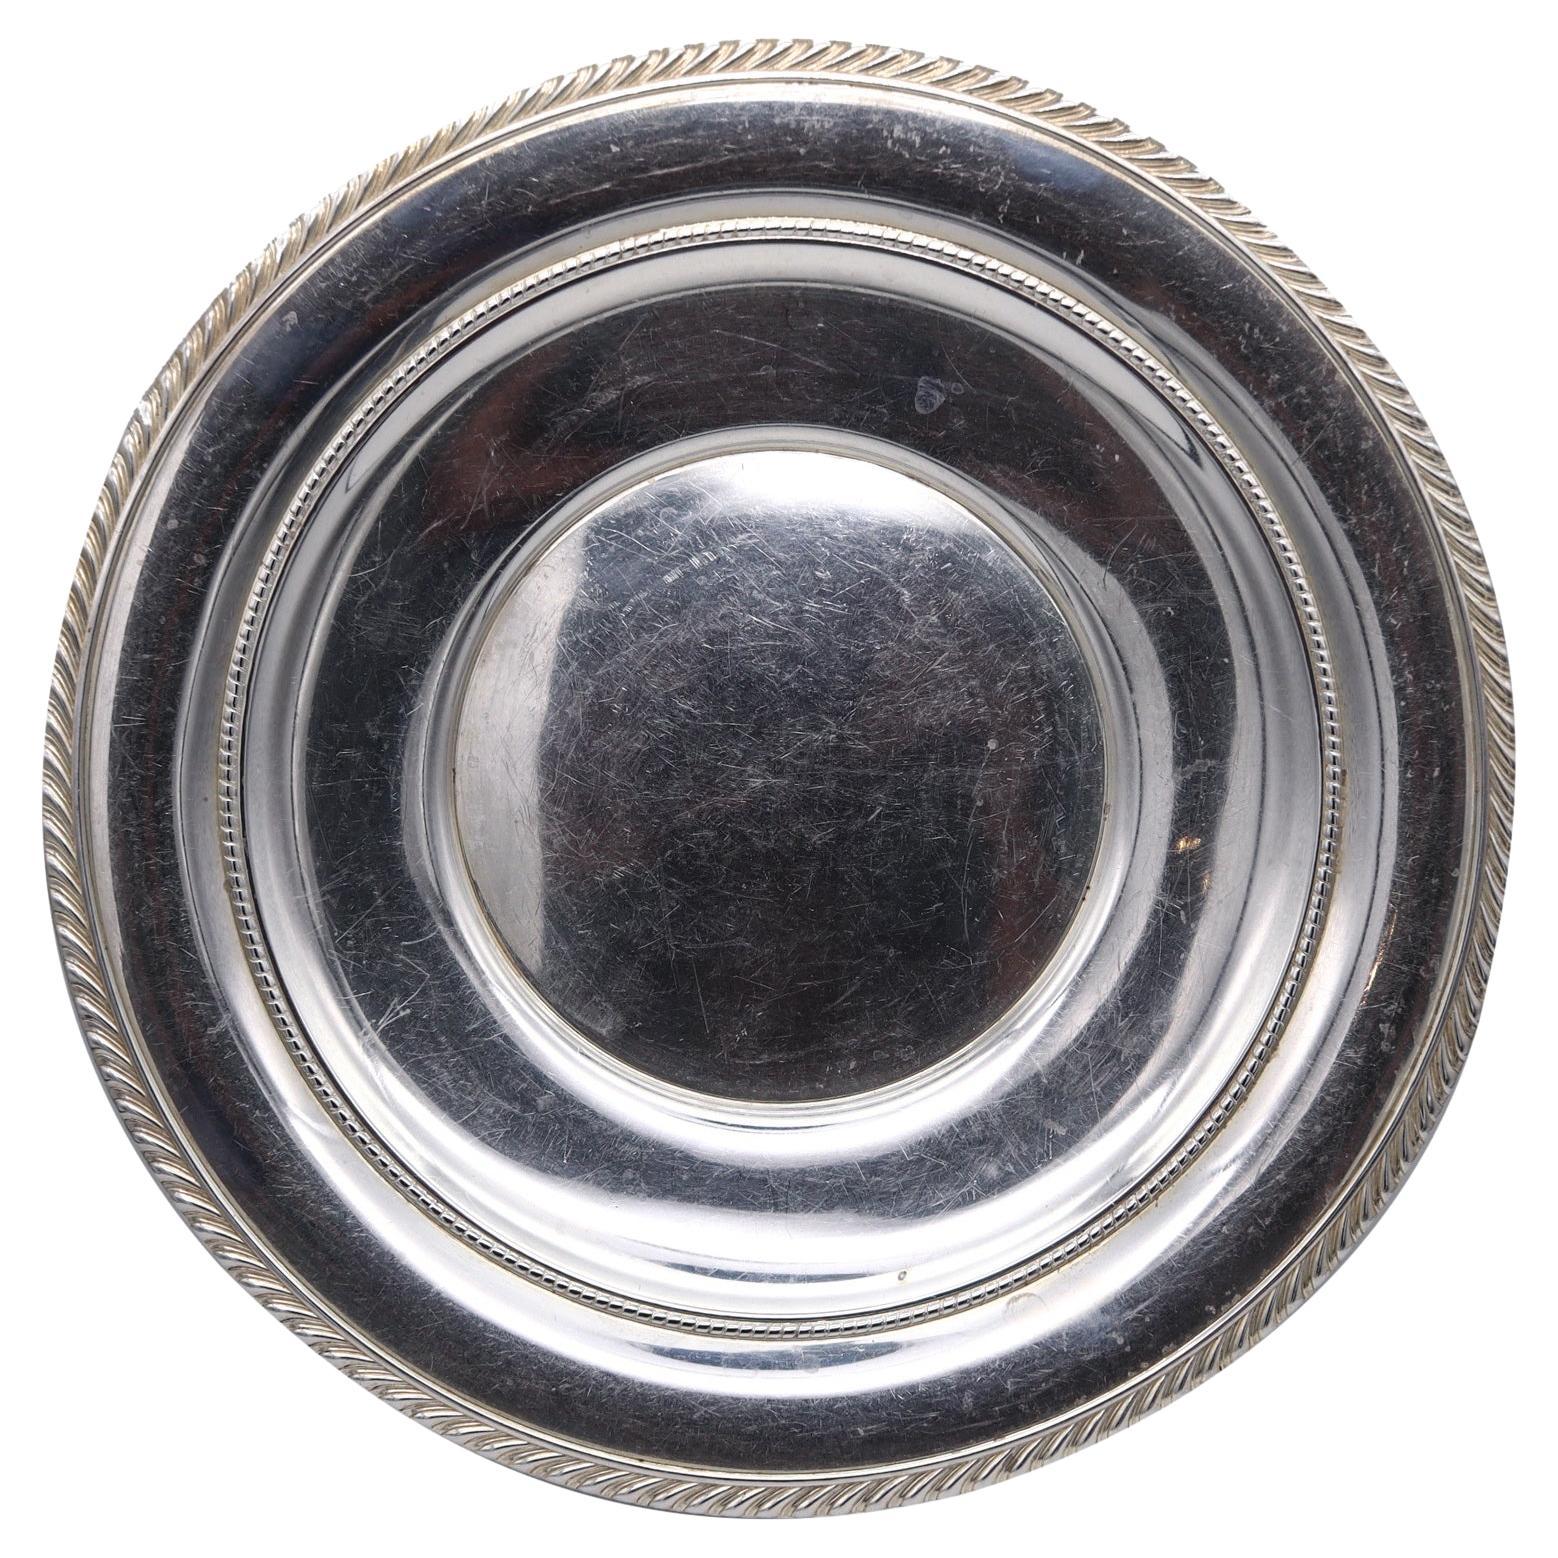 Gorham American 1960 Gadroon Round Tray Pattern 345 in .925 Sterling Silver